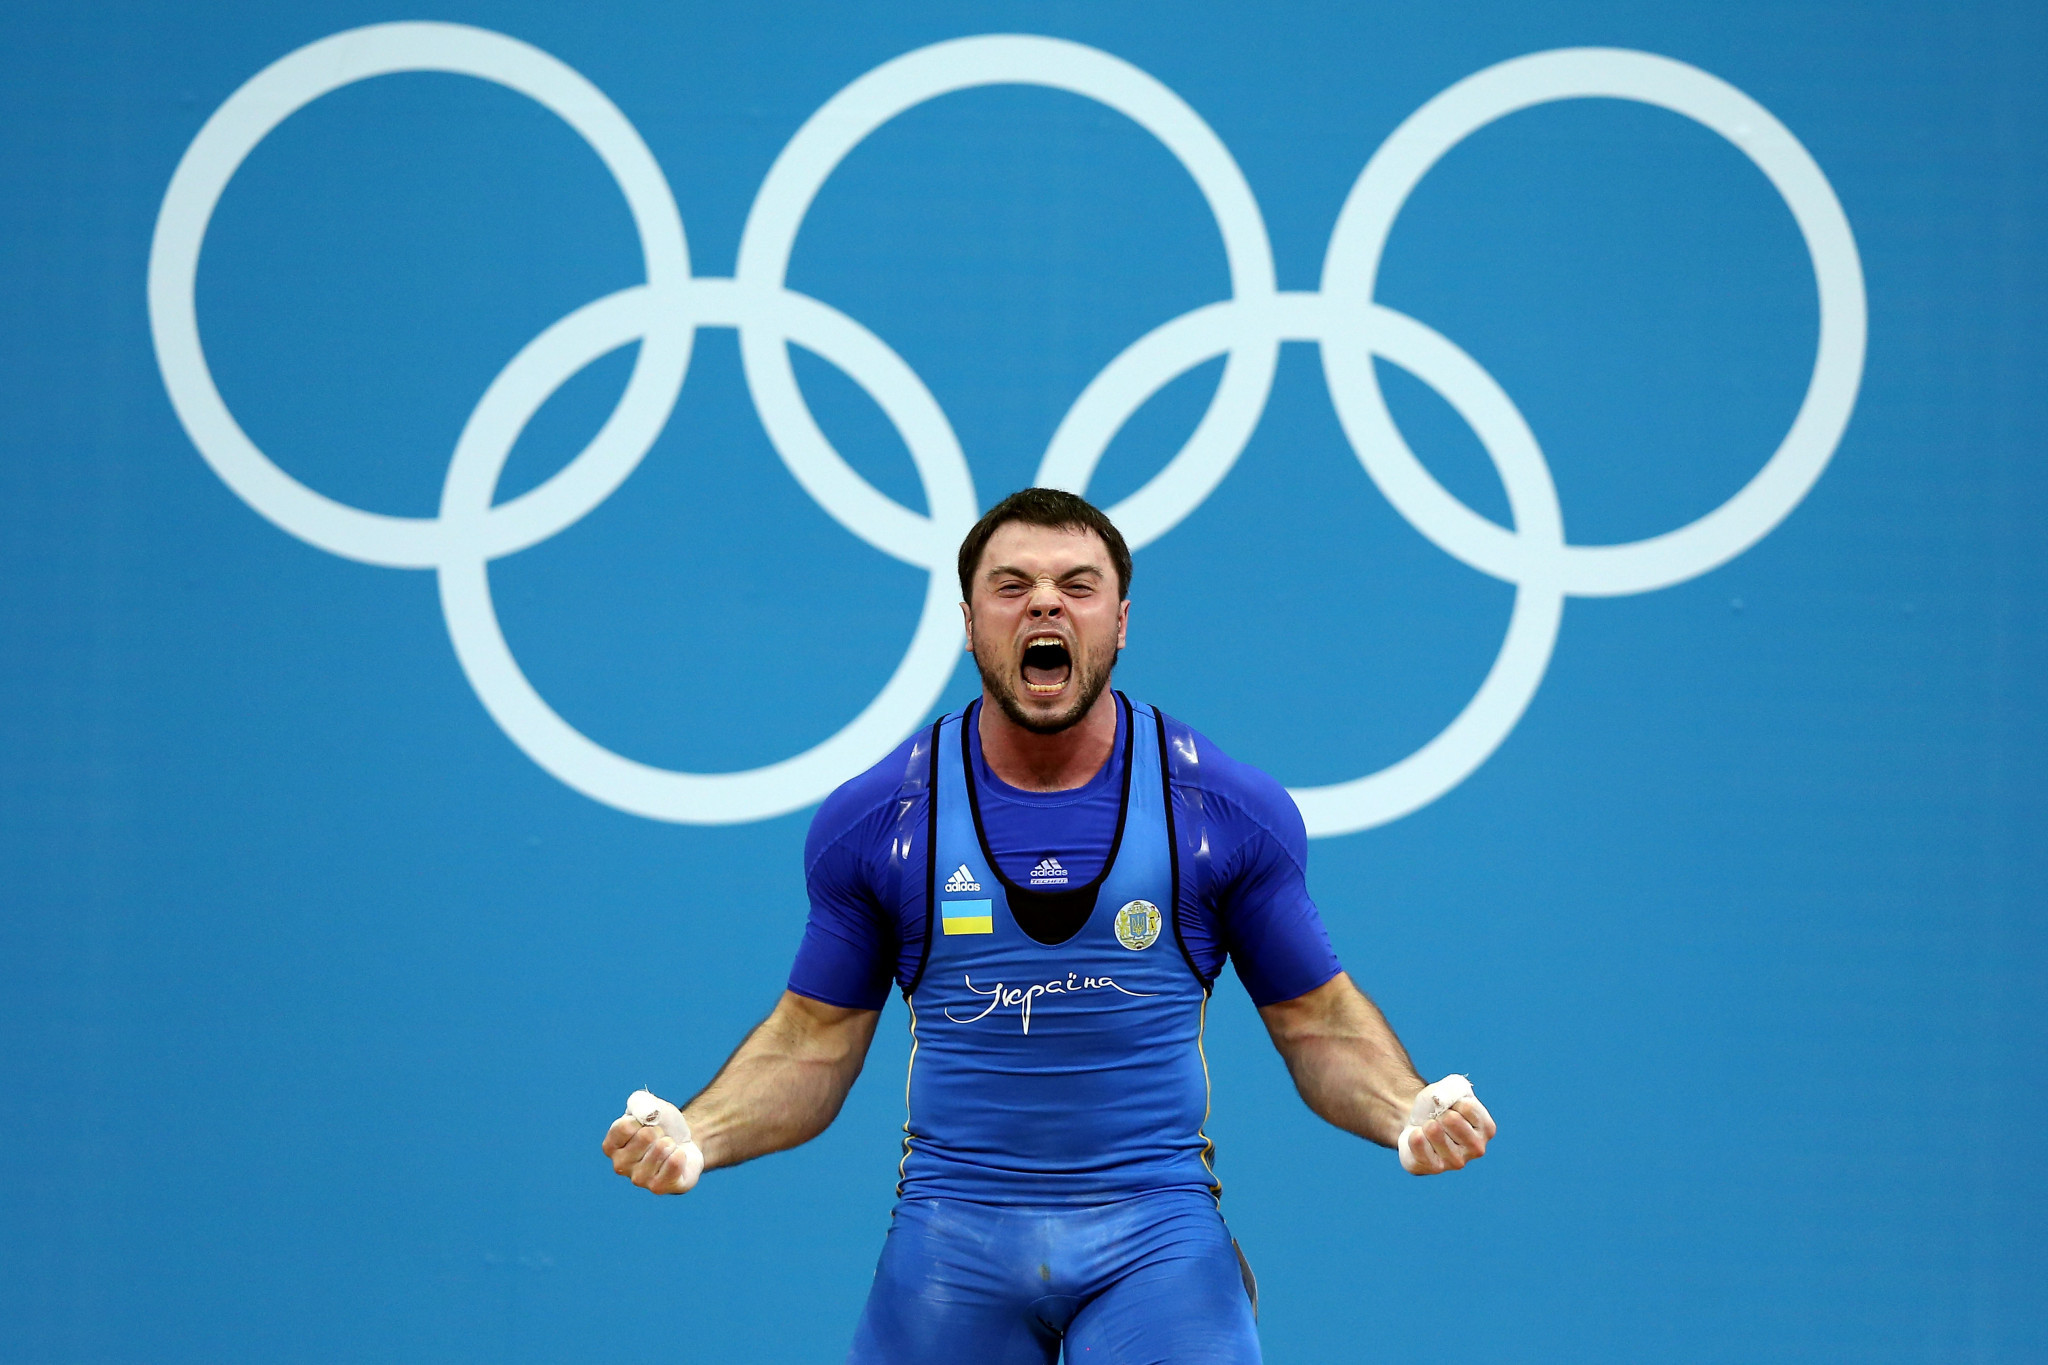 Five weightlifters including London 2012 Olympic champion Oleksiy Torokhtiy have been provisionally suspended ©Getty Images